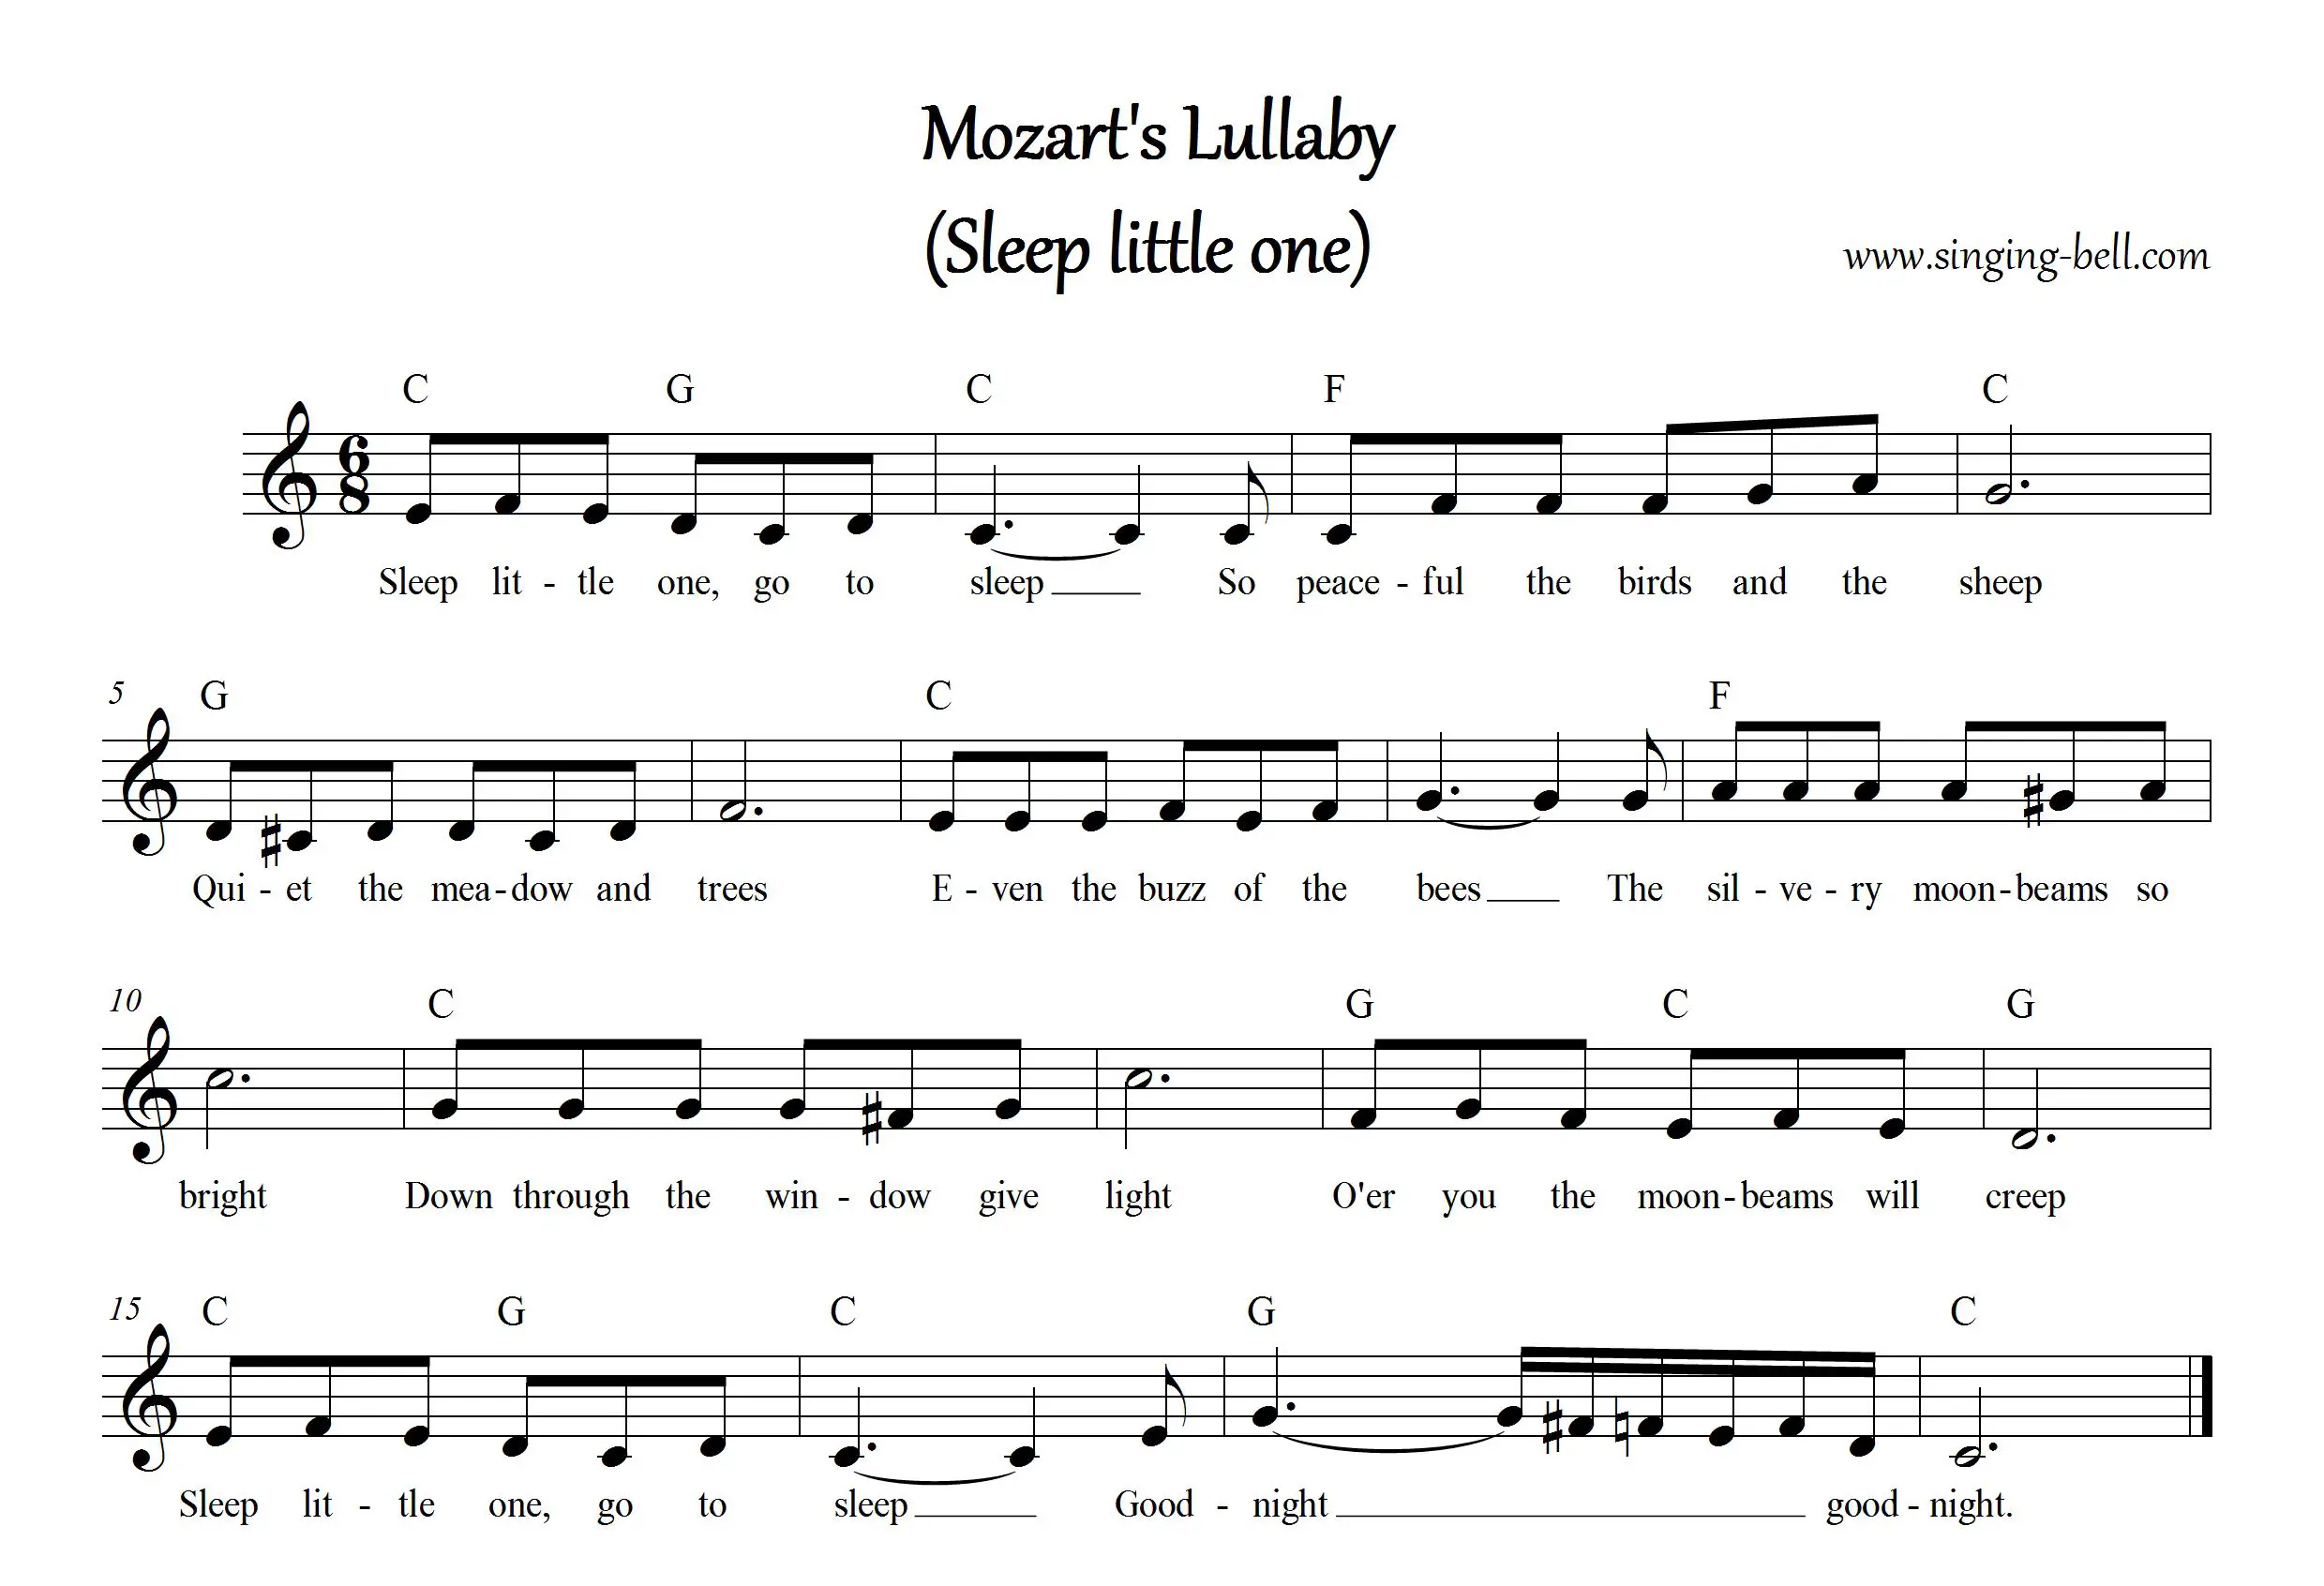 “Mozart's Lullaby (Sleep little one)” Music Score with chords in C